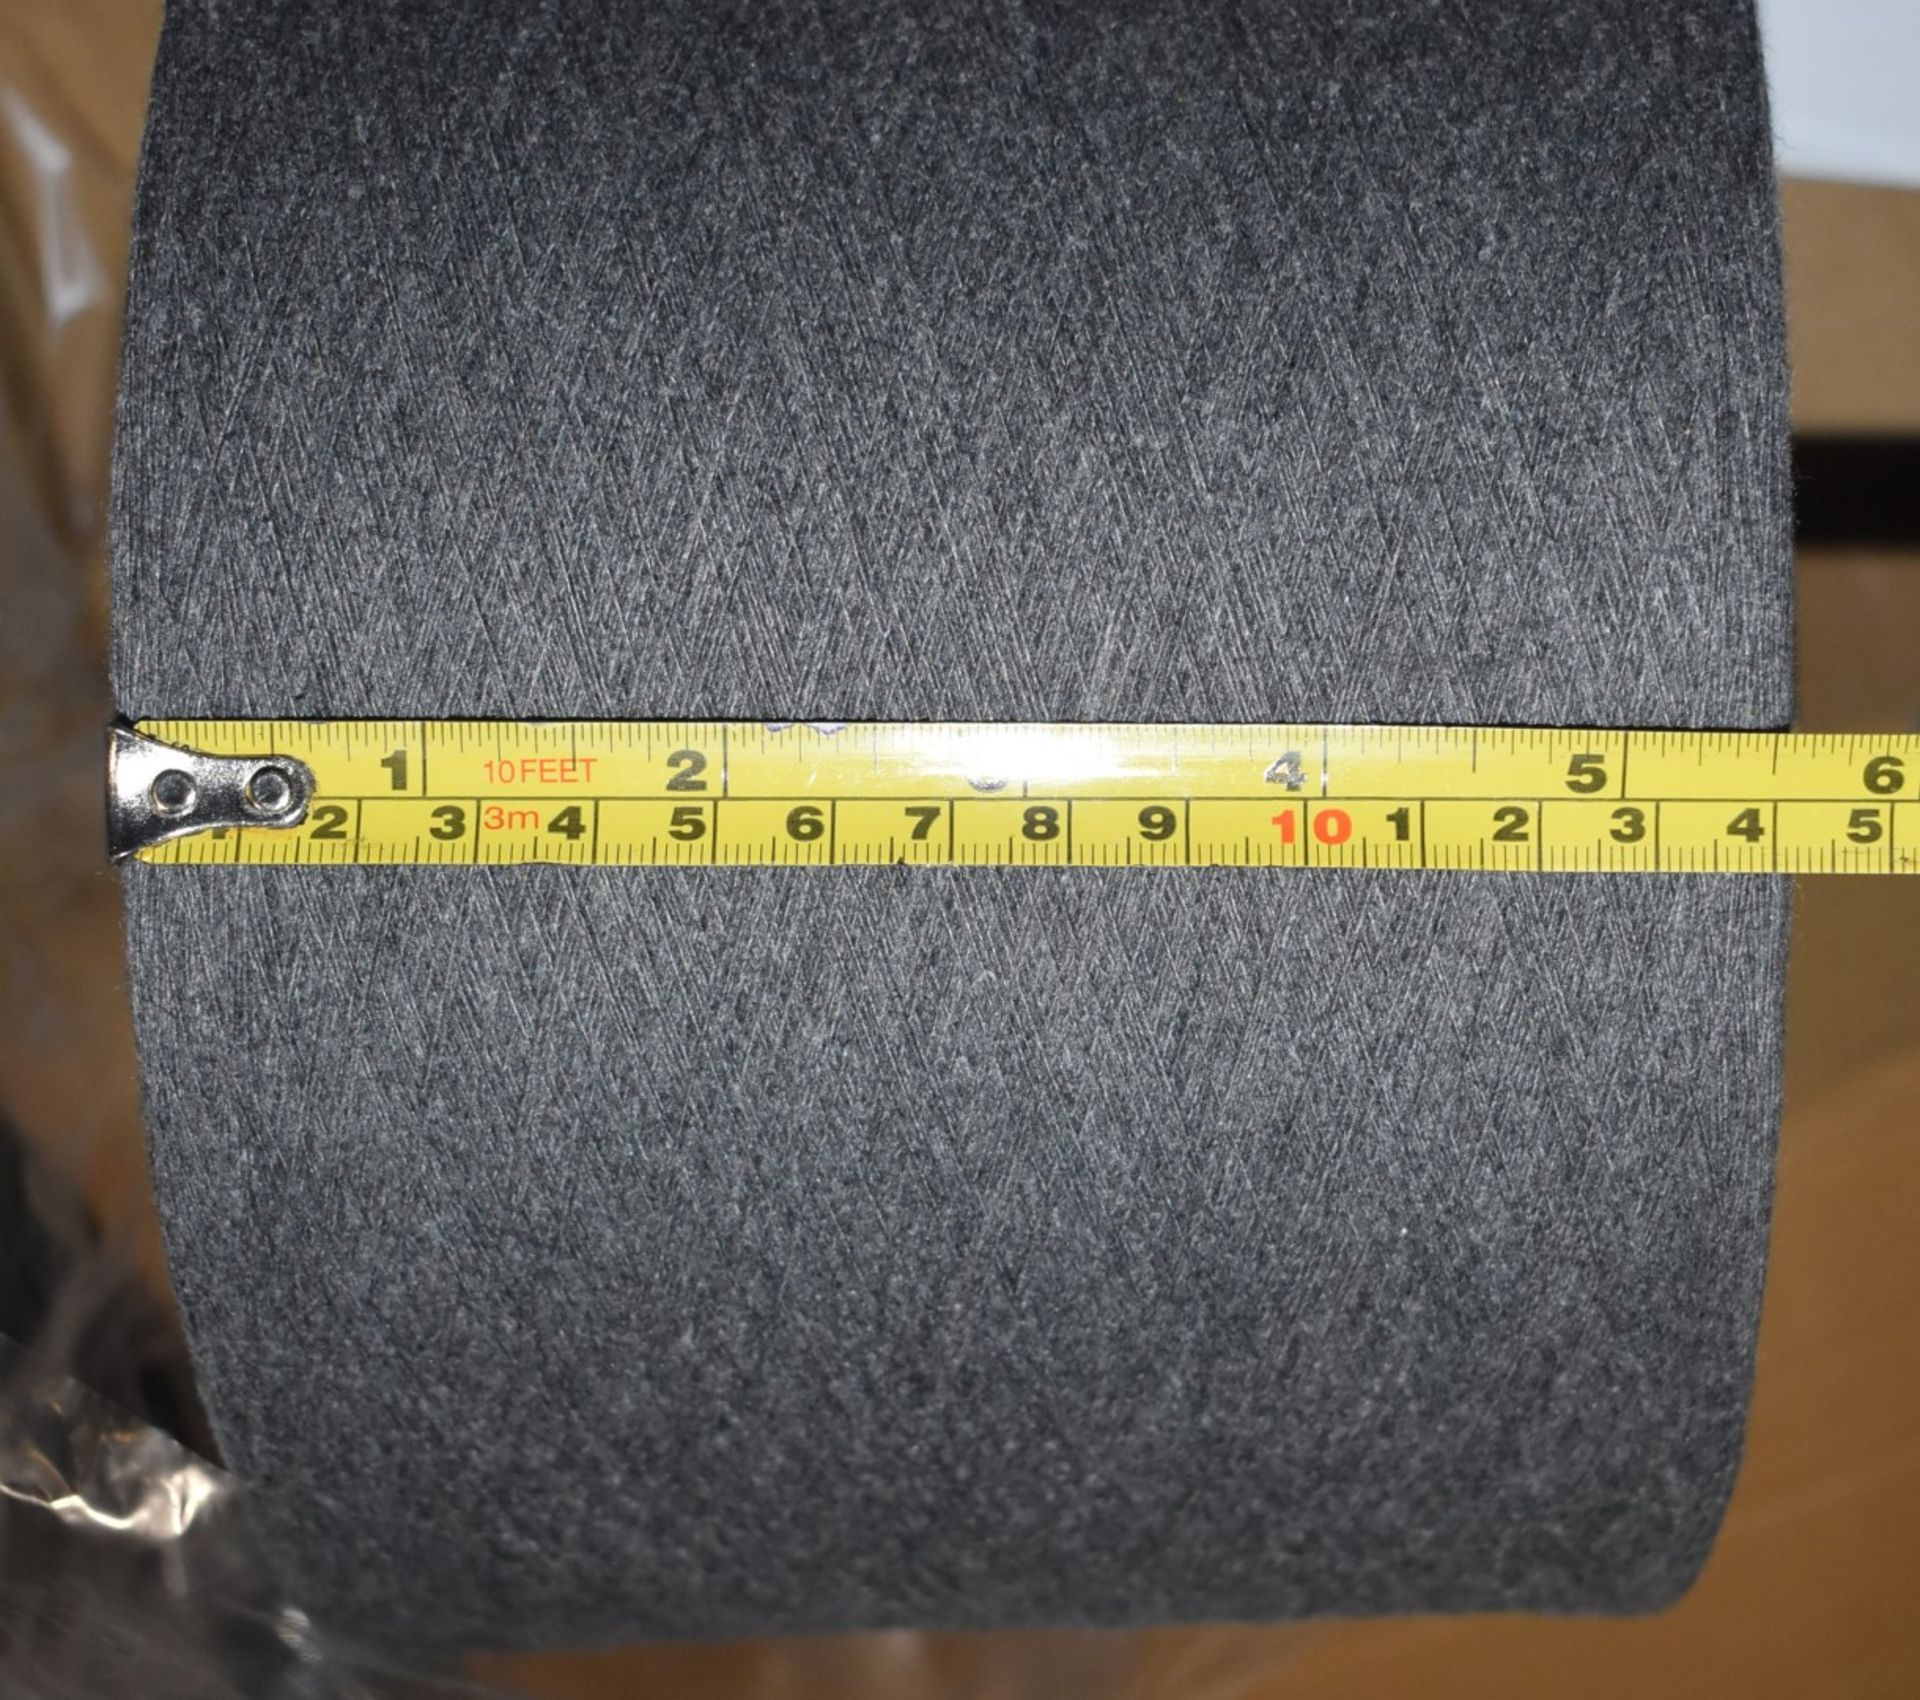 10 x Cones of 1/13 MicroCotton Knitting Yarn - Mid Grey - Approx Weight: 2,500g - New Stock ABL Yarn - Image 11 of 17